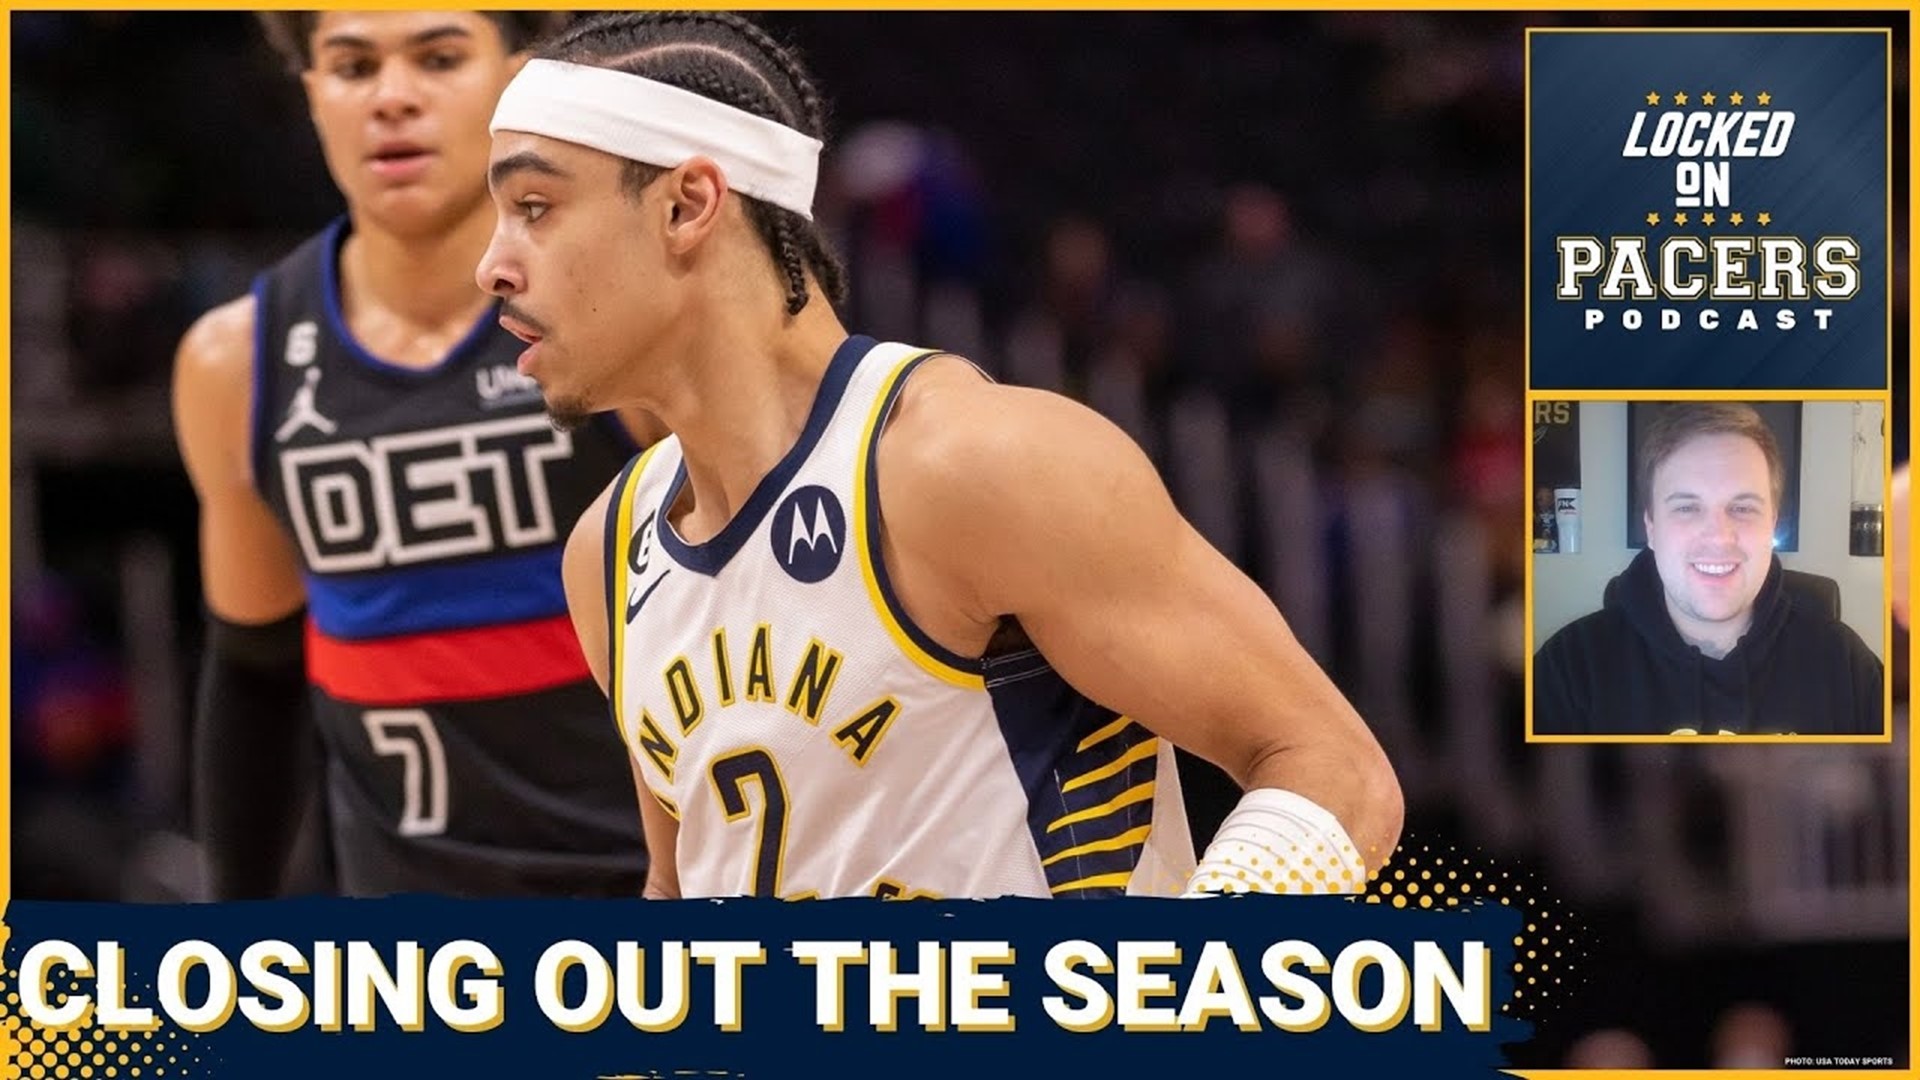 The Indiana Pacers have two more games and three more days left in their season. What do the Pacers want to happen this weekend?